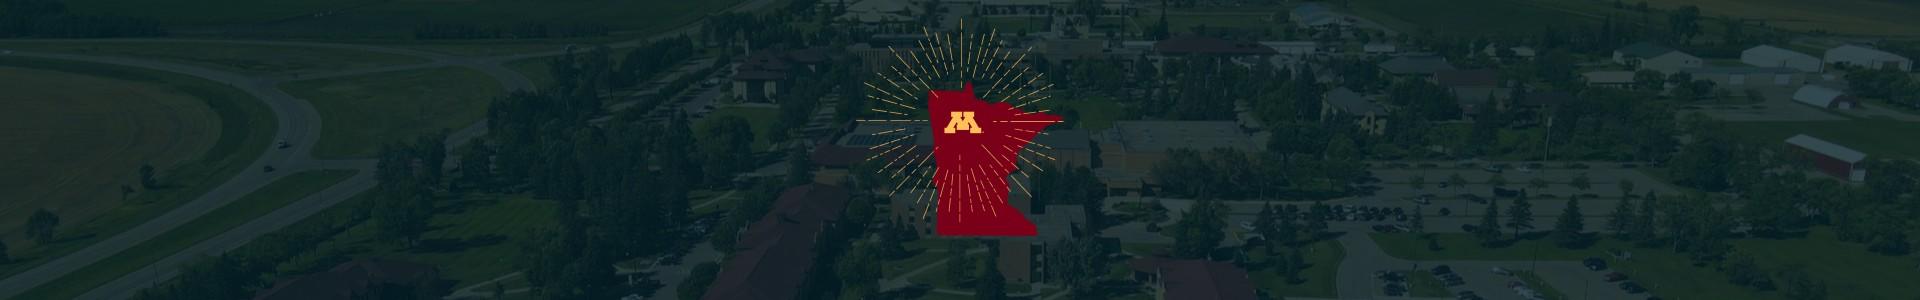 Aerial of UMN Crookston campus with a Minnesota and Block M logo overlay